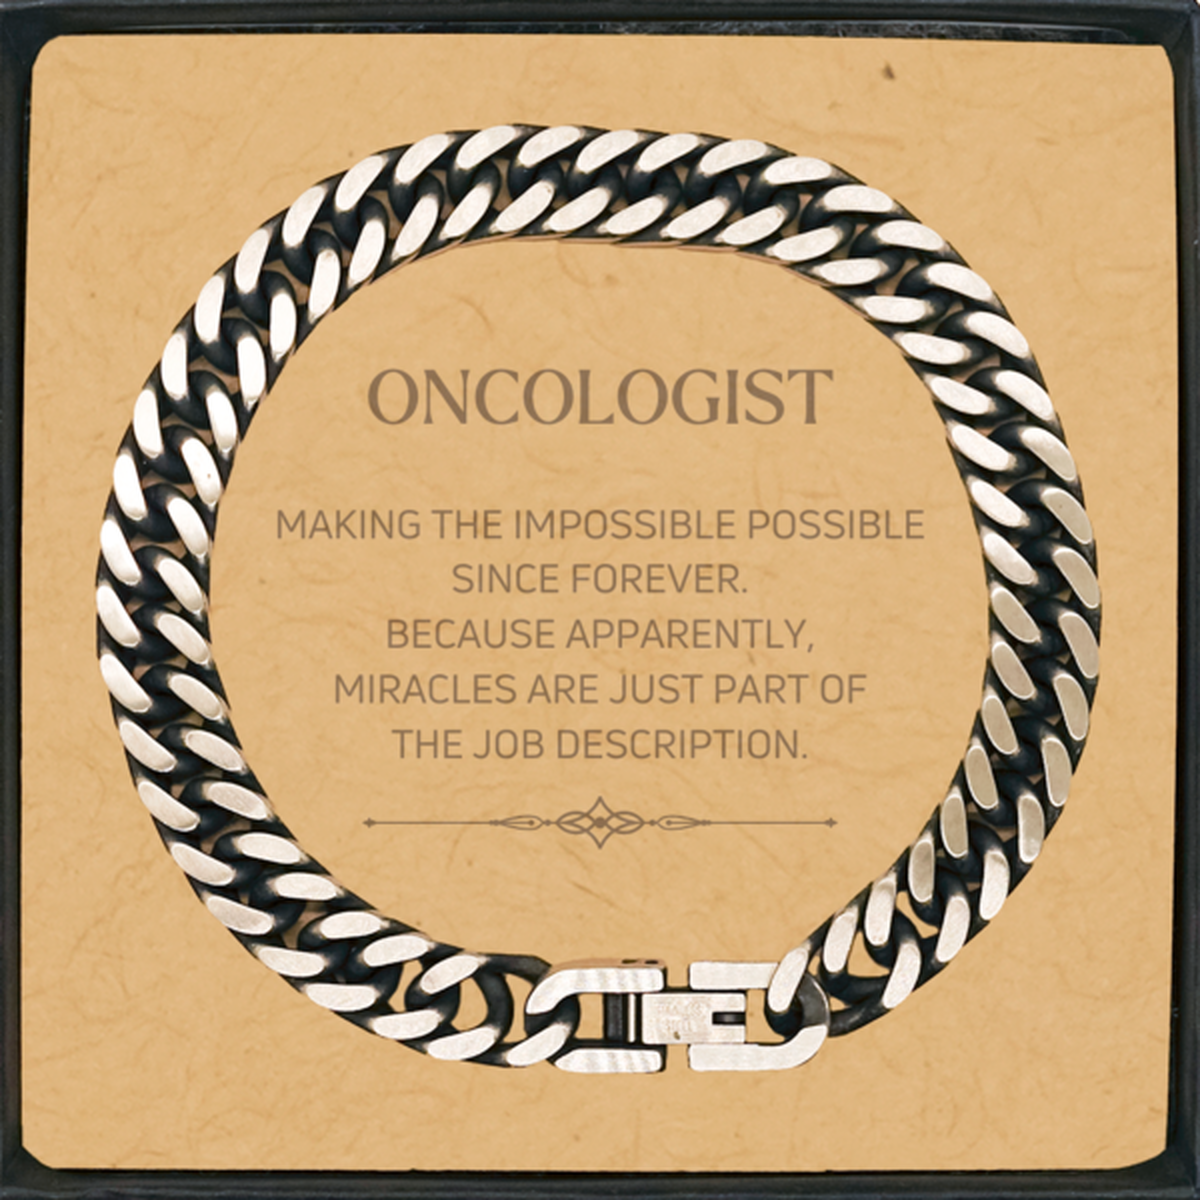 Funny Oncologist Gifts, Miracles are just part of the job description, Inspirational Birthday Cuban Link Chain Bracelet For Oncologist, Men, Women, Coworkers, Friends, Boss